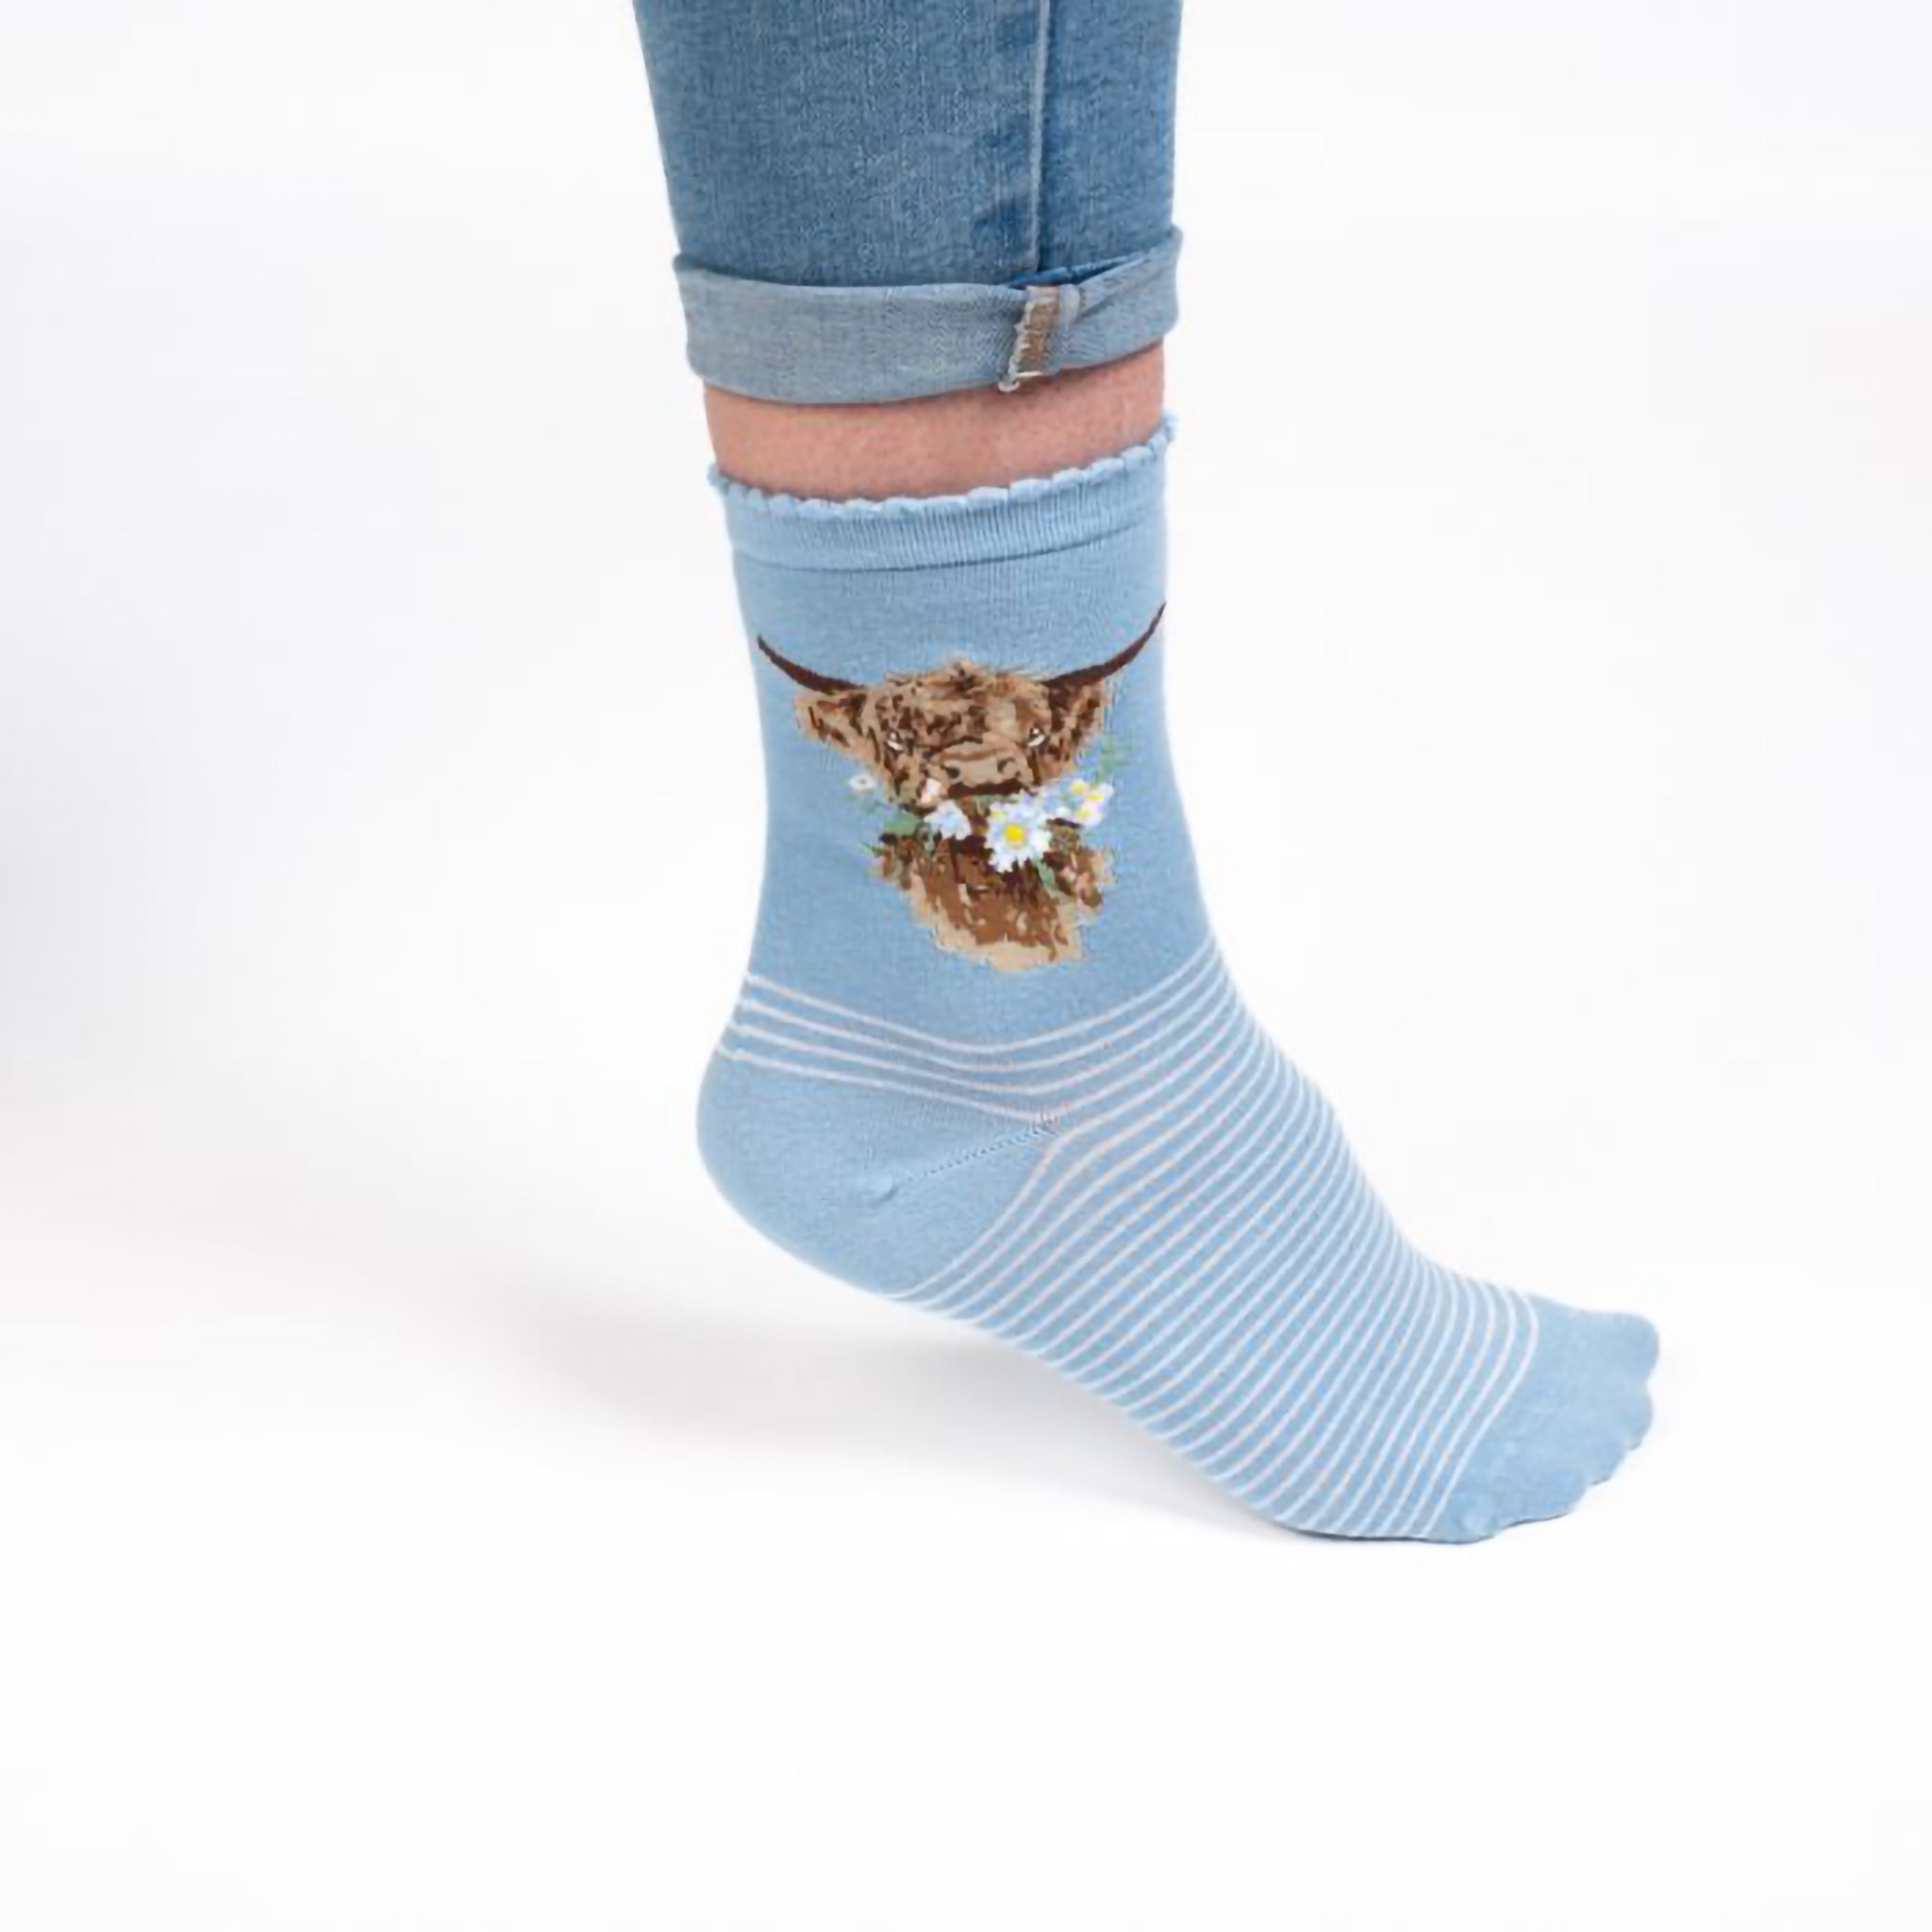 Model wearing a pair of light blue socks with a highland cow picture and white stripes and small ruffled tops